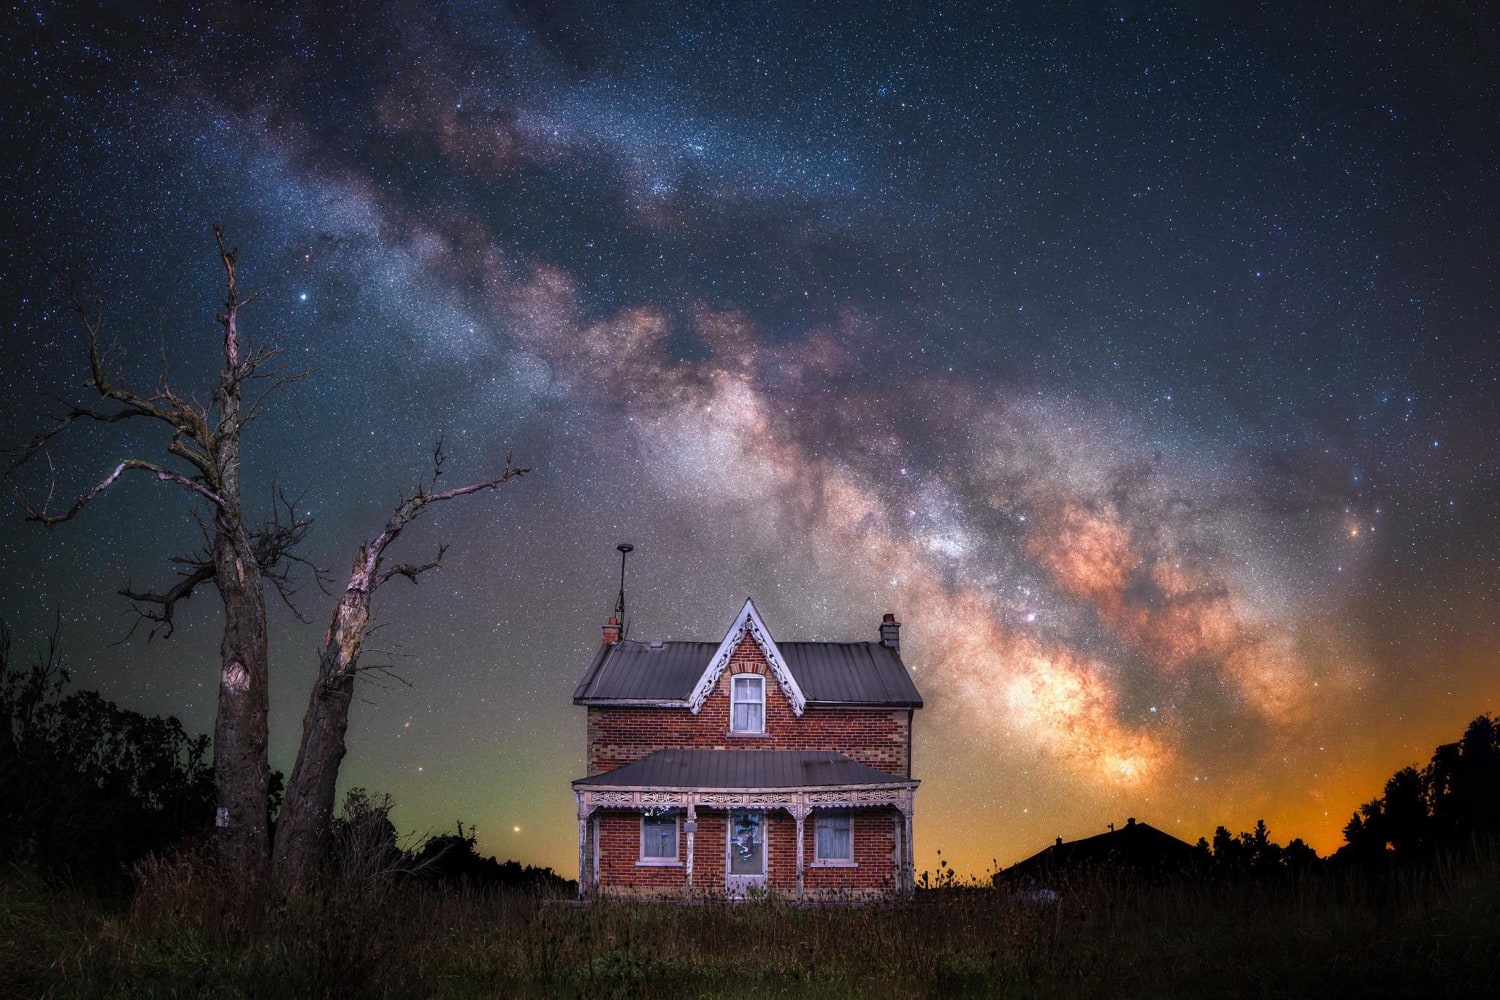 Our Milky Way over an old homestead in Ontario, Canada